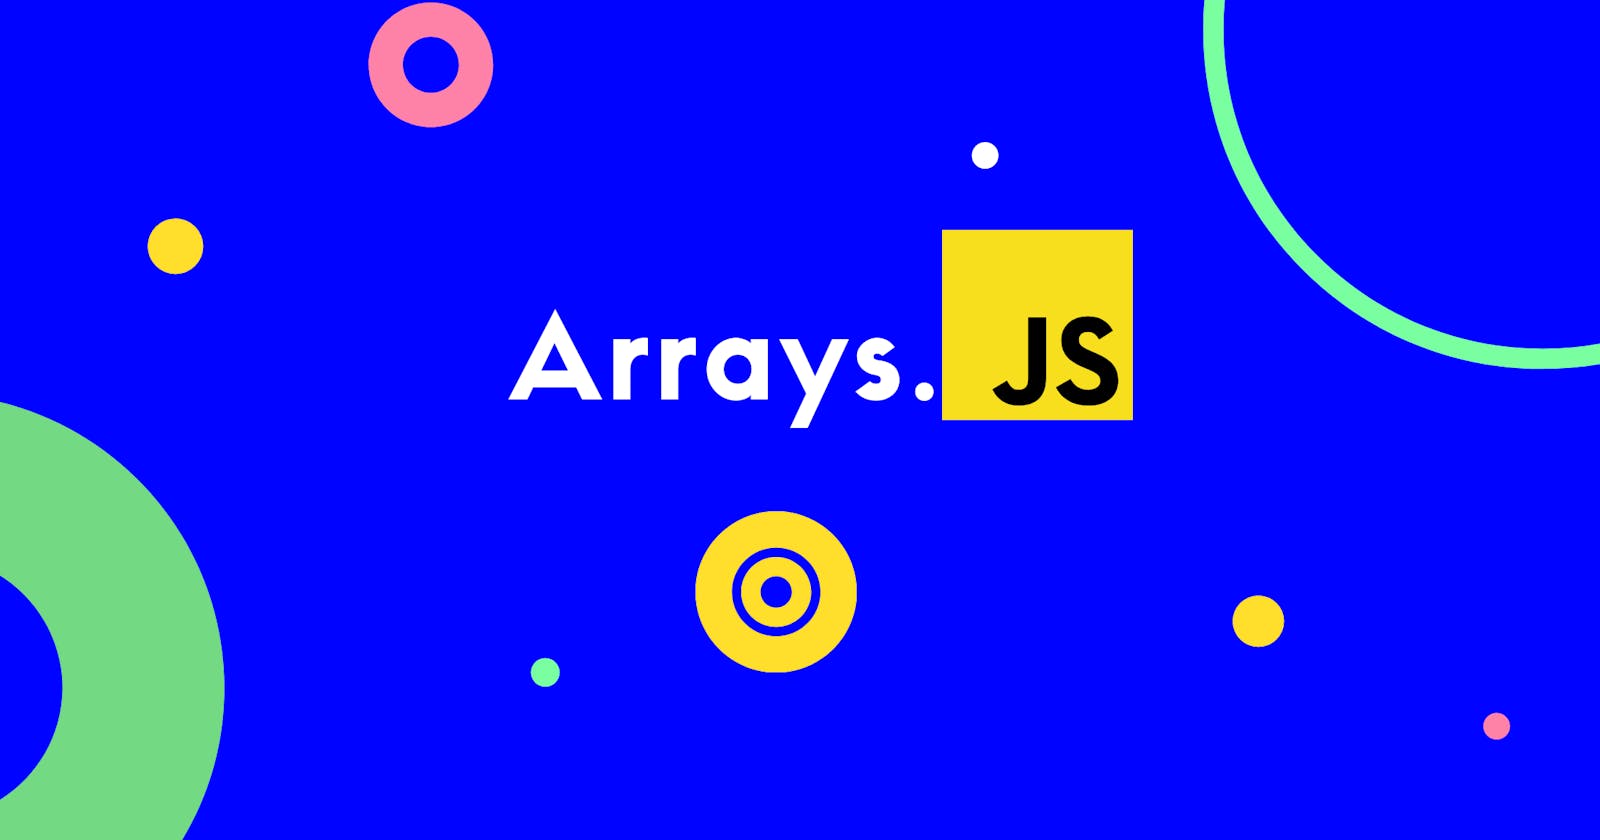 Basic Array Operations in JavaScript